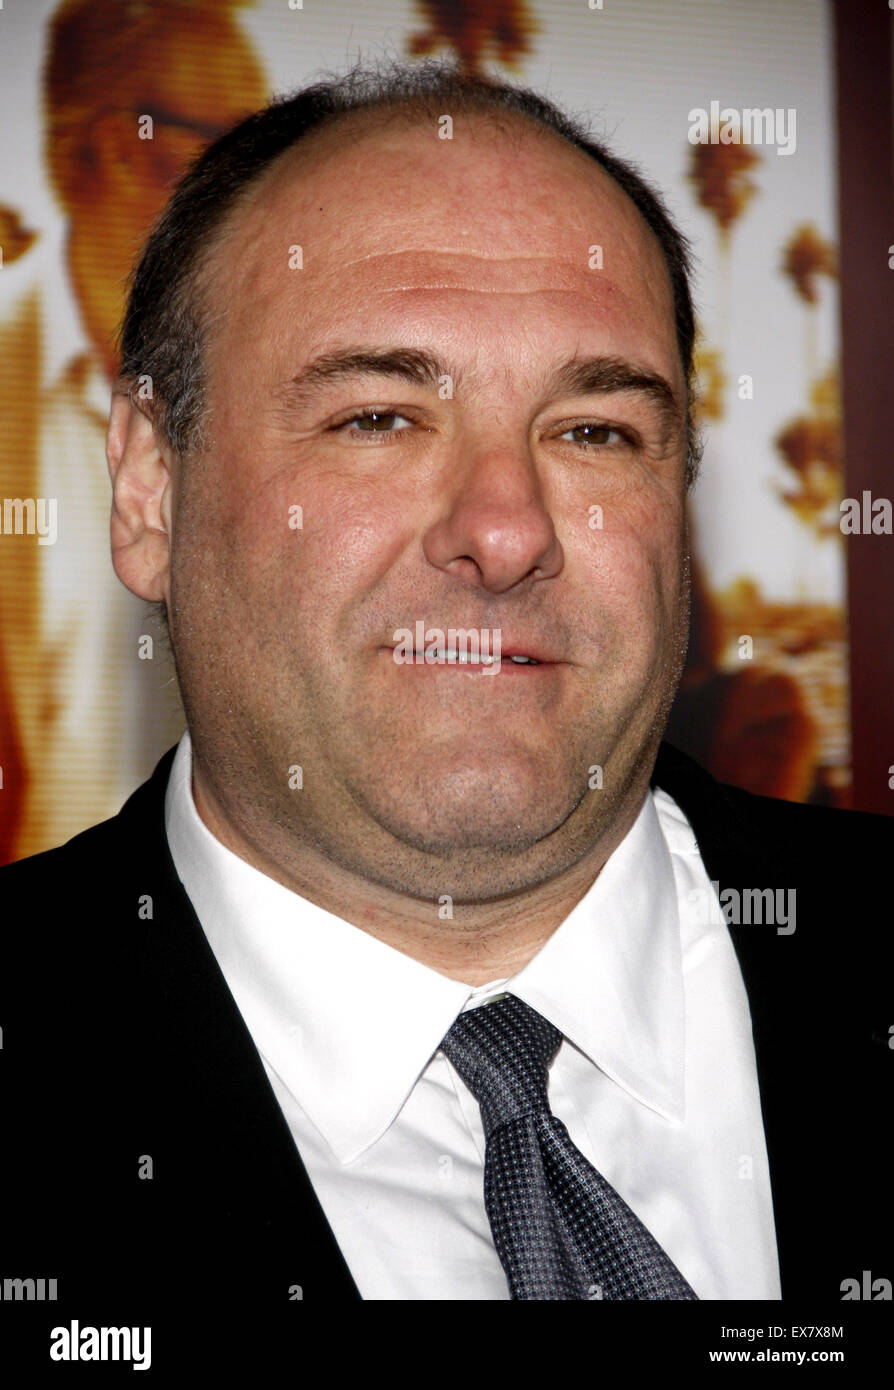 James Gandolfini at the HBO's 'Cinema Verite' Los Angeles Premiere held at the Paramount Studios in Hollywood on April 11, 2011. Stock Photo